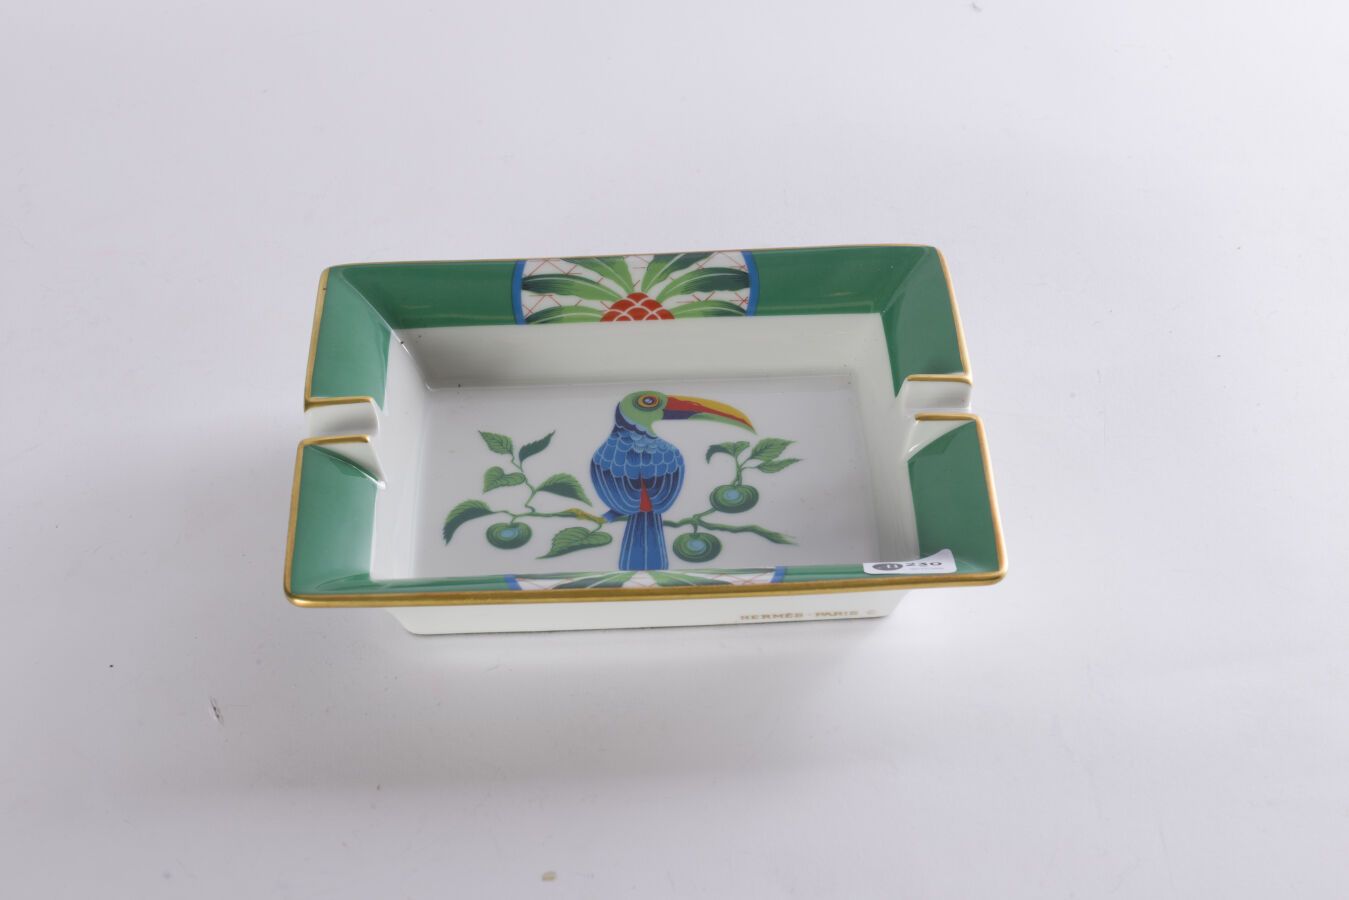 Null Hermès Paris, made in France, rectangular porcelain ashtray with polychrome&hellip;